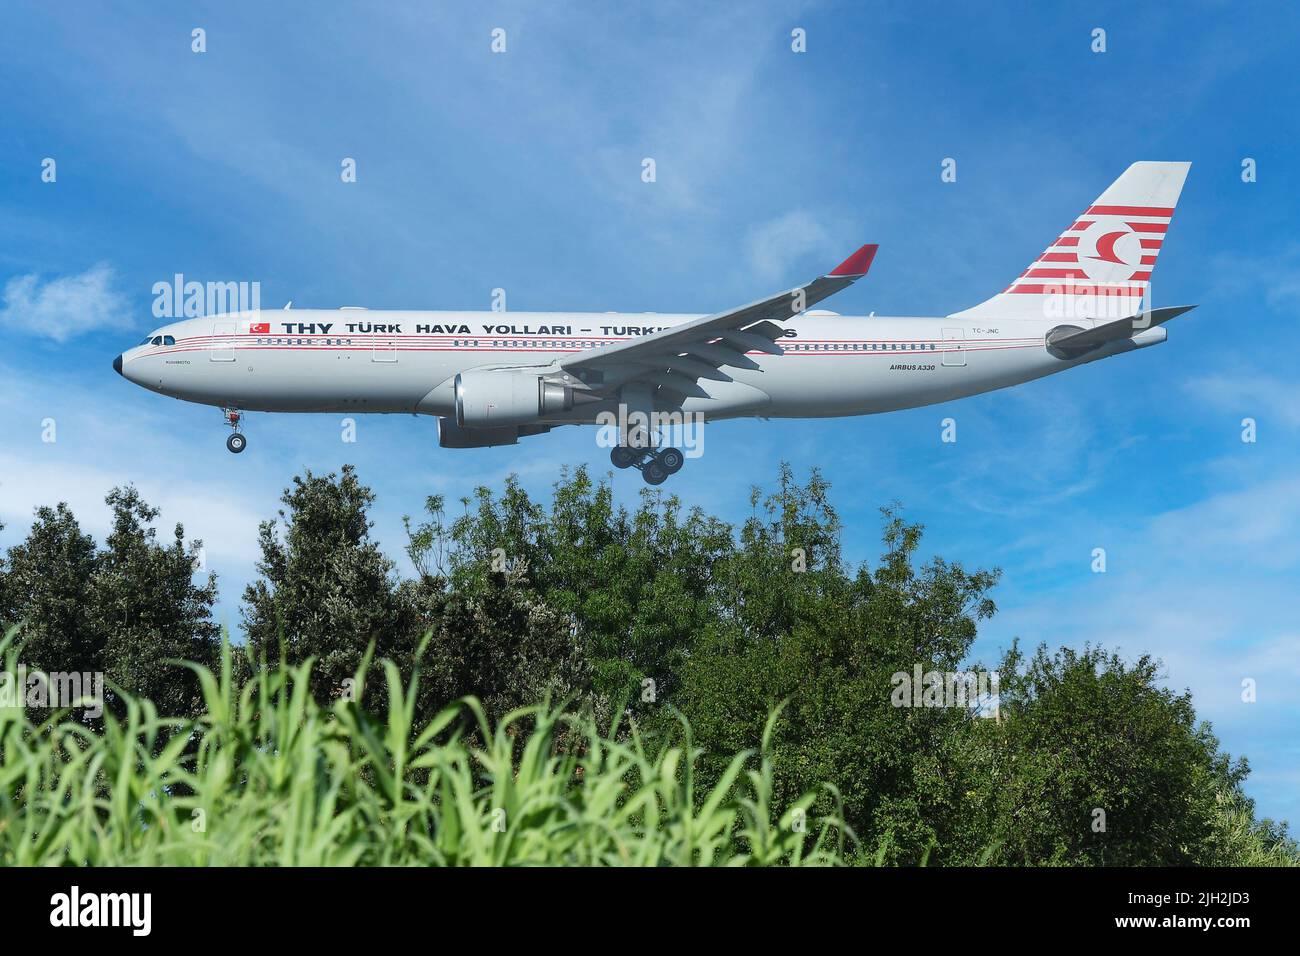 Fiumicino Airport, Italy. 14th July, 2022. Airbus A330 Turkish Airlines old livery Turk Hava Yollari .Aircraft to Fiumicino airport. Fiumicino (Italy), 14th July, 2022. Credit: massimo insabato/Alamy Live News Stock Photo